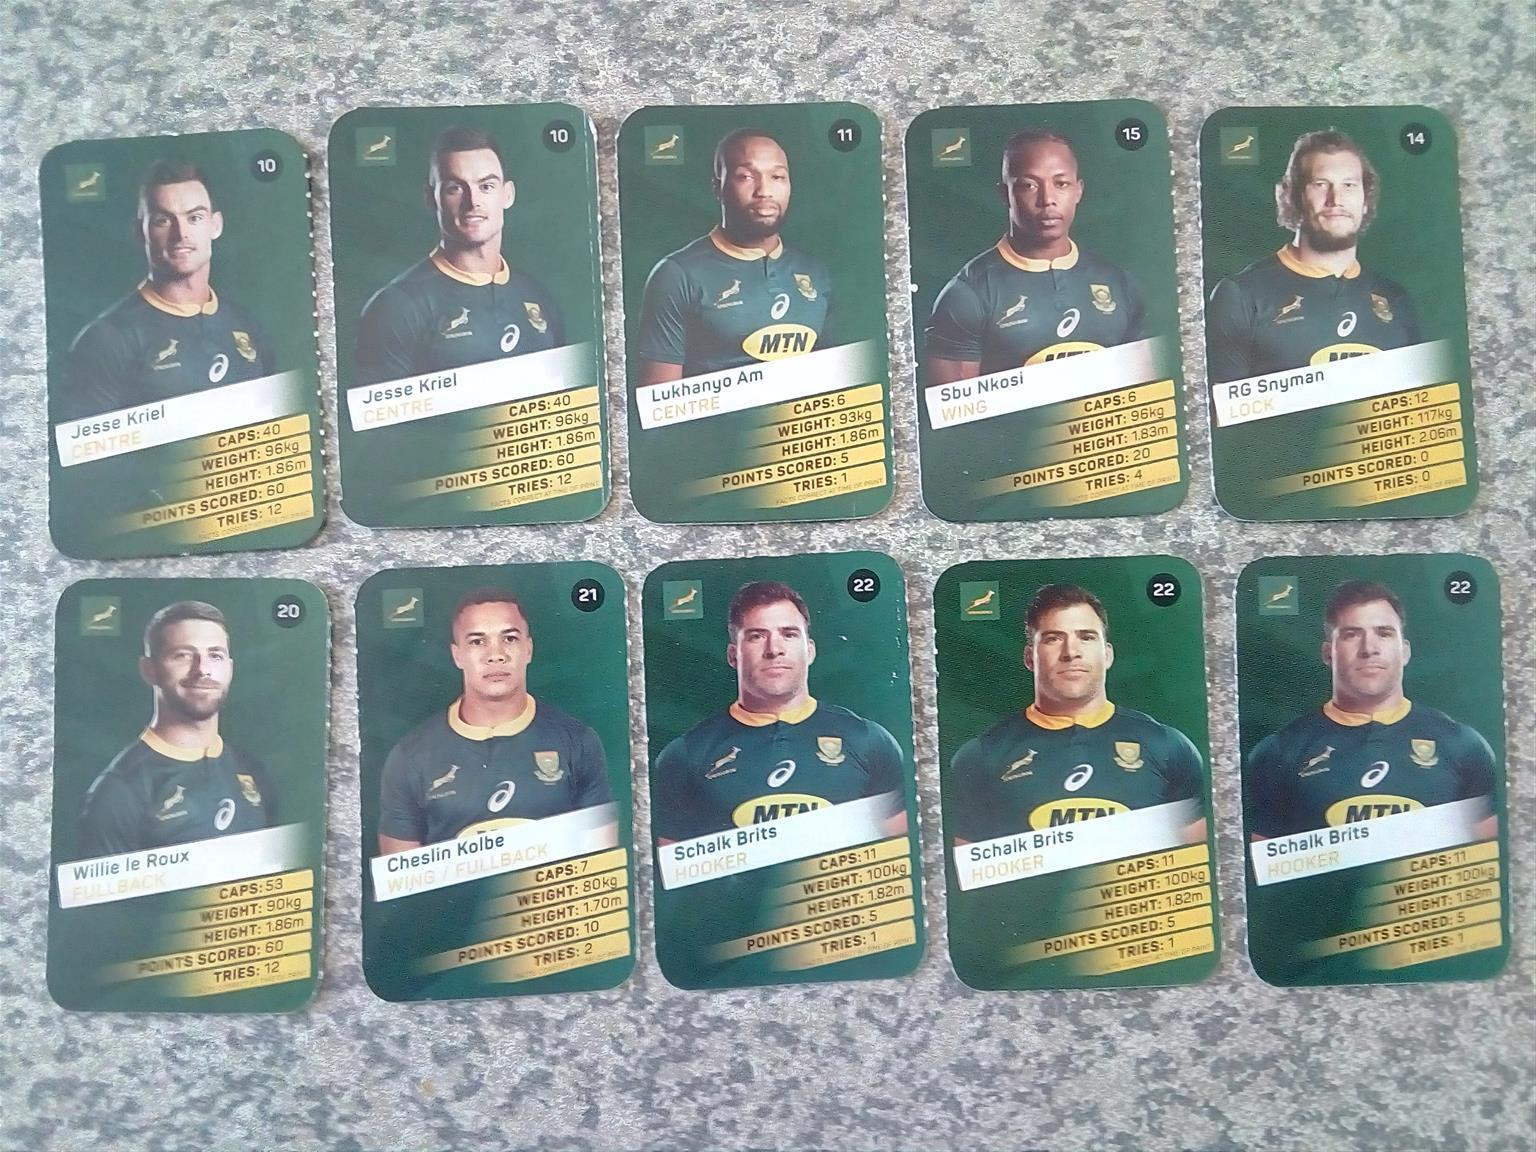 PICK 'N PAY SUPER CARDS: SPRINGBOKS MEN'S AND WOMEN'S RUGBY TEAMS